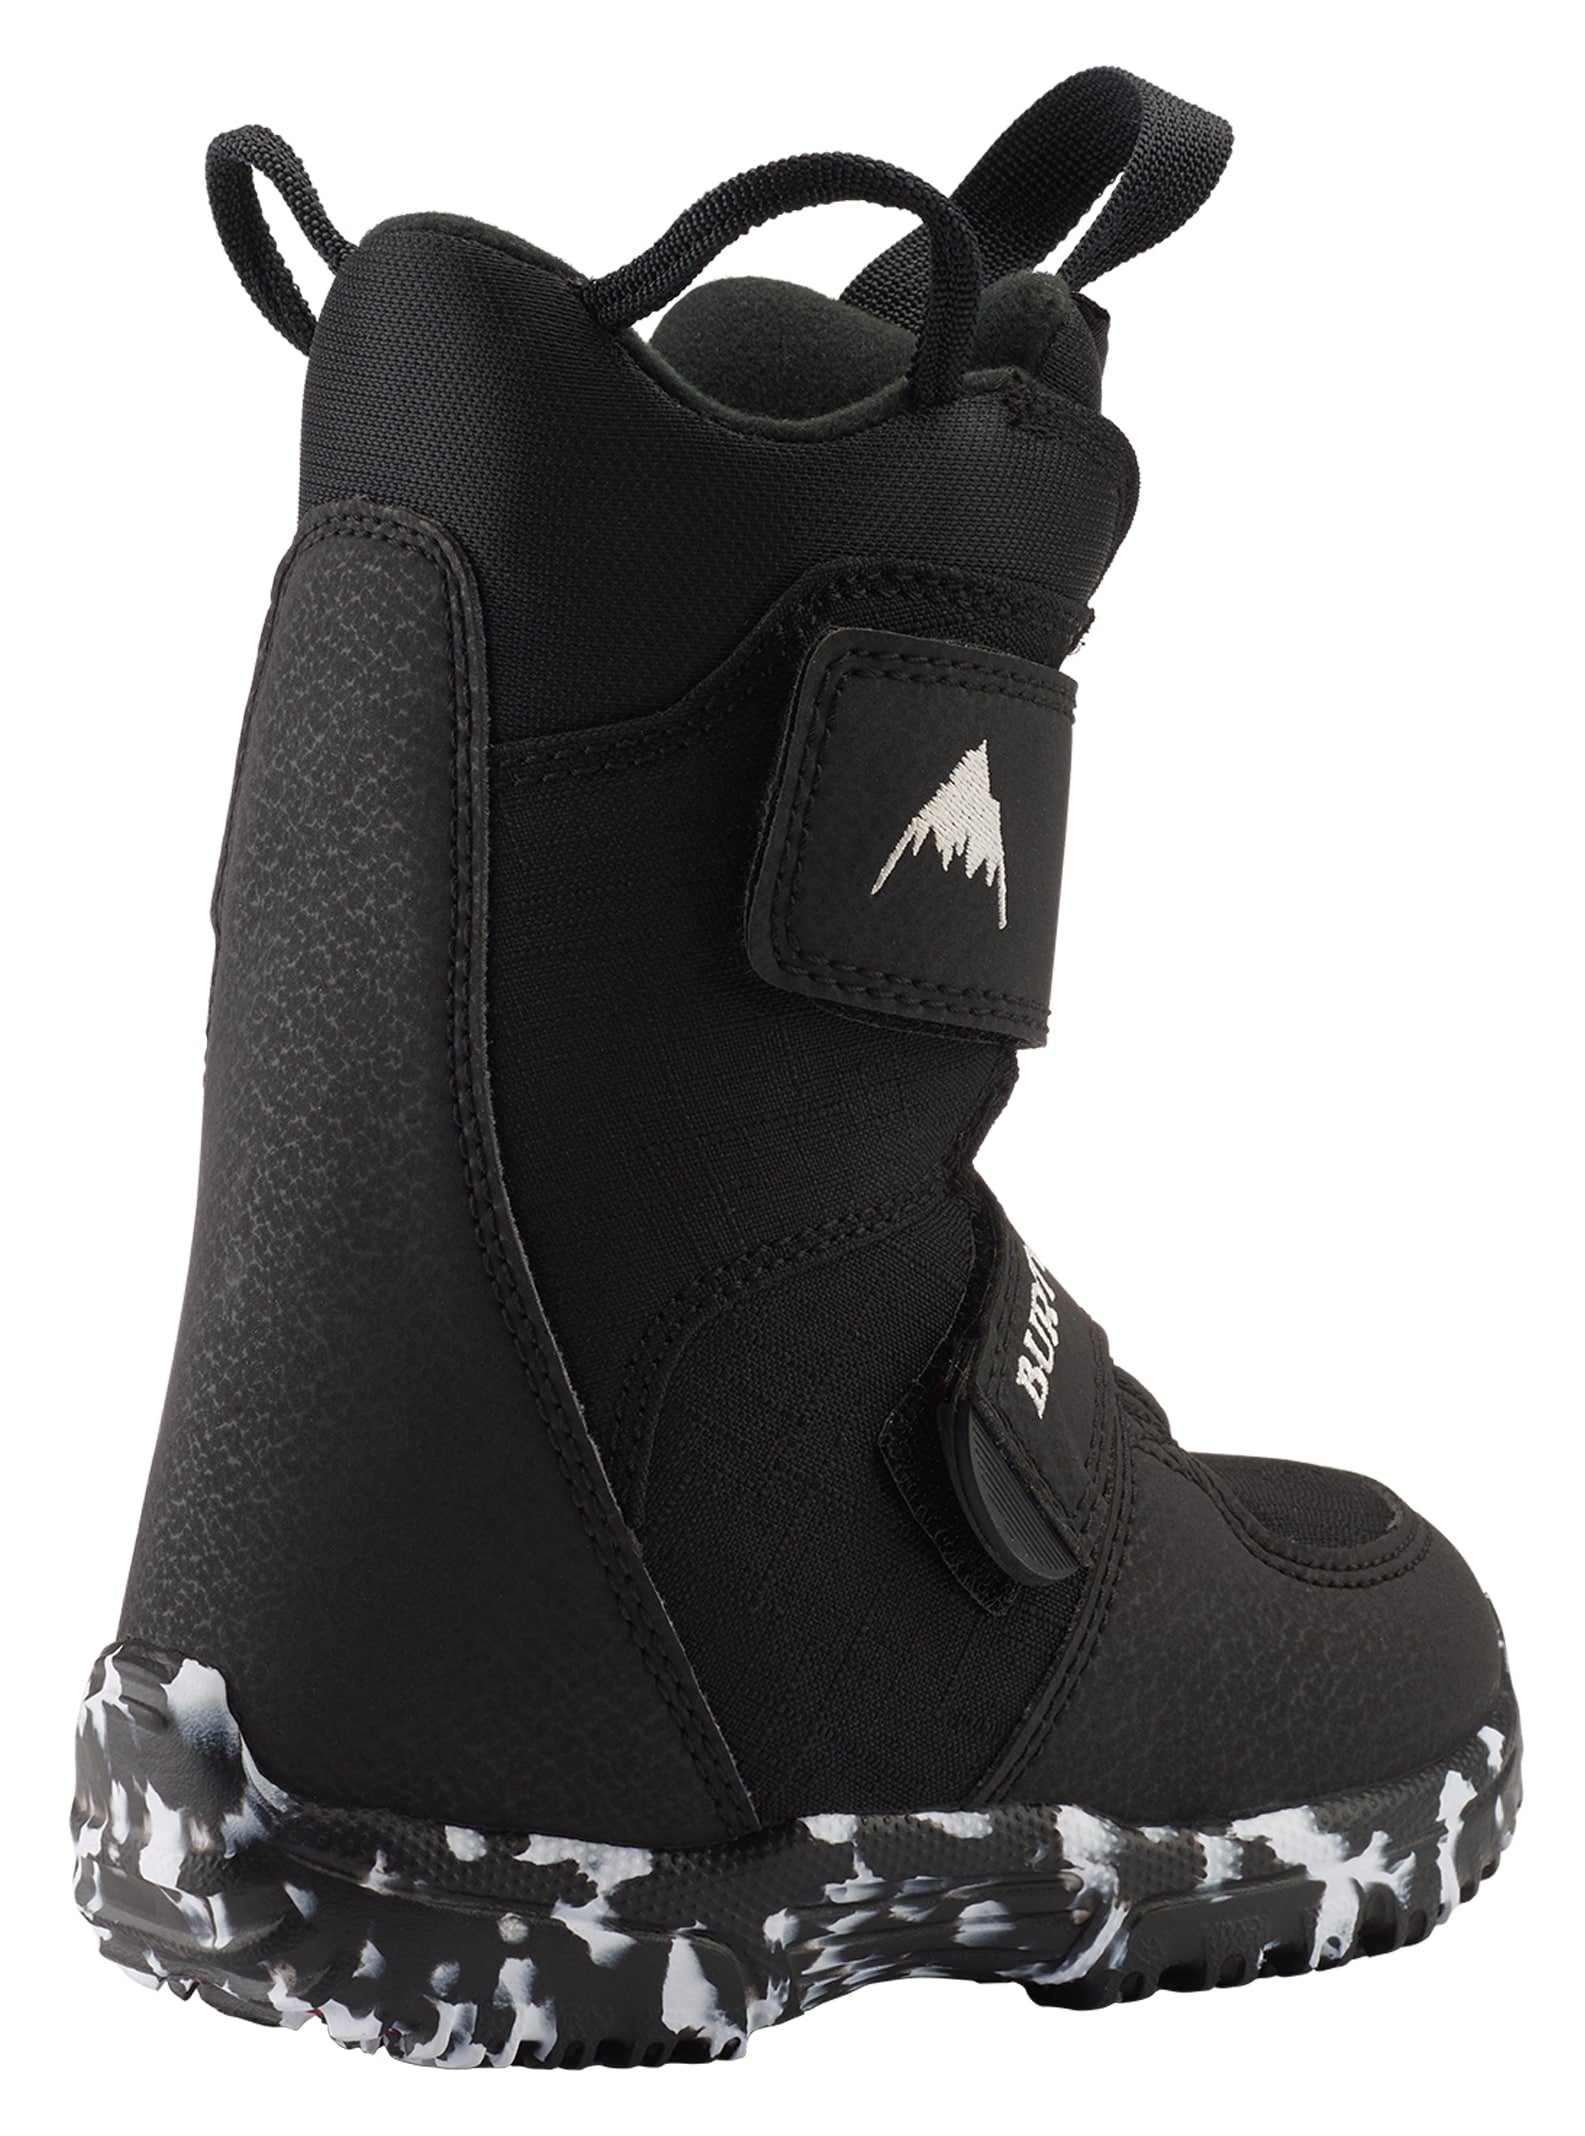 Toddlers' Mini Grom Snowboard Boots, Black